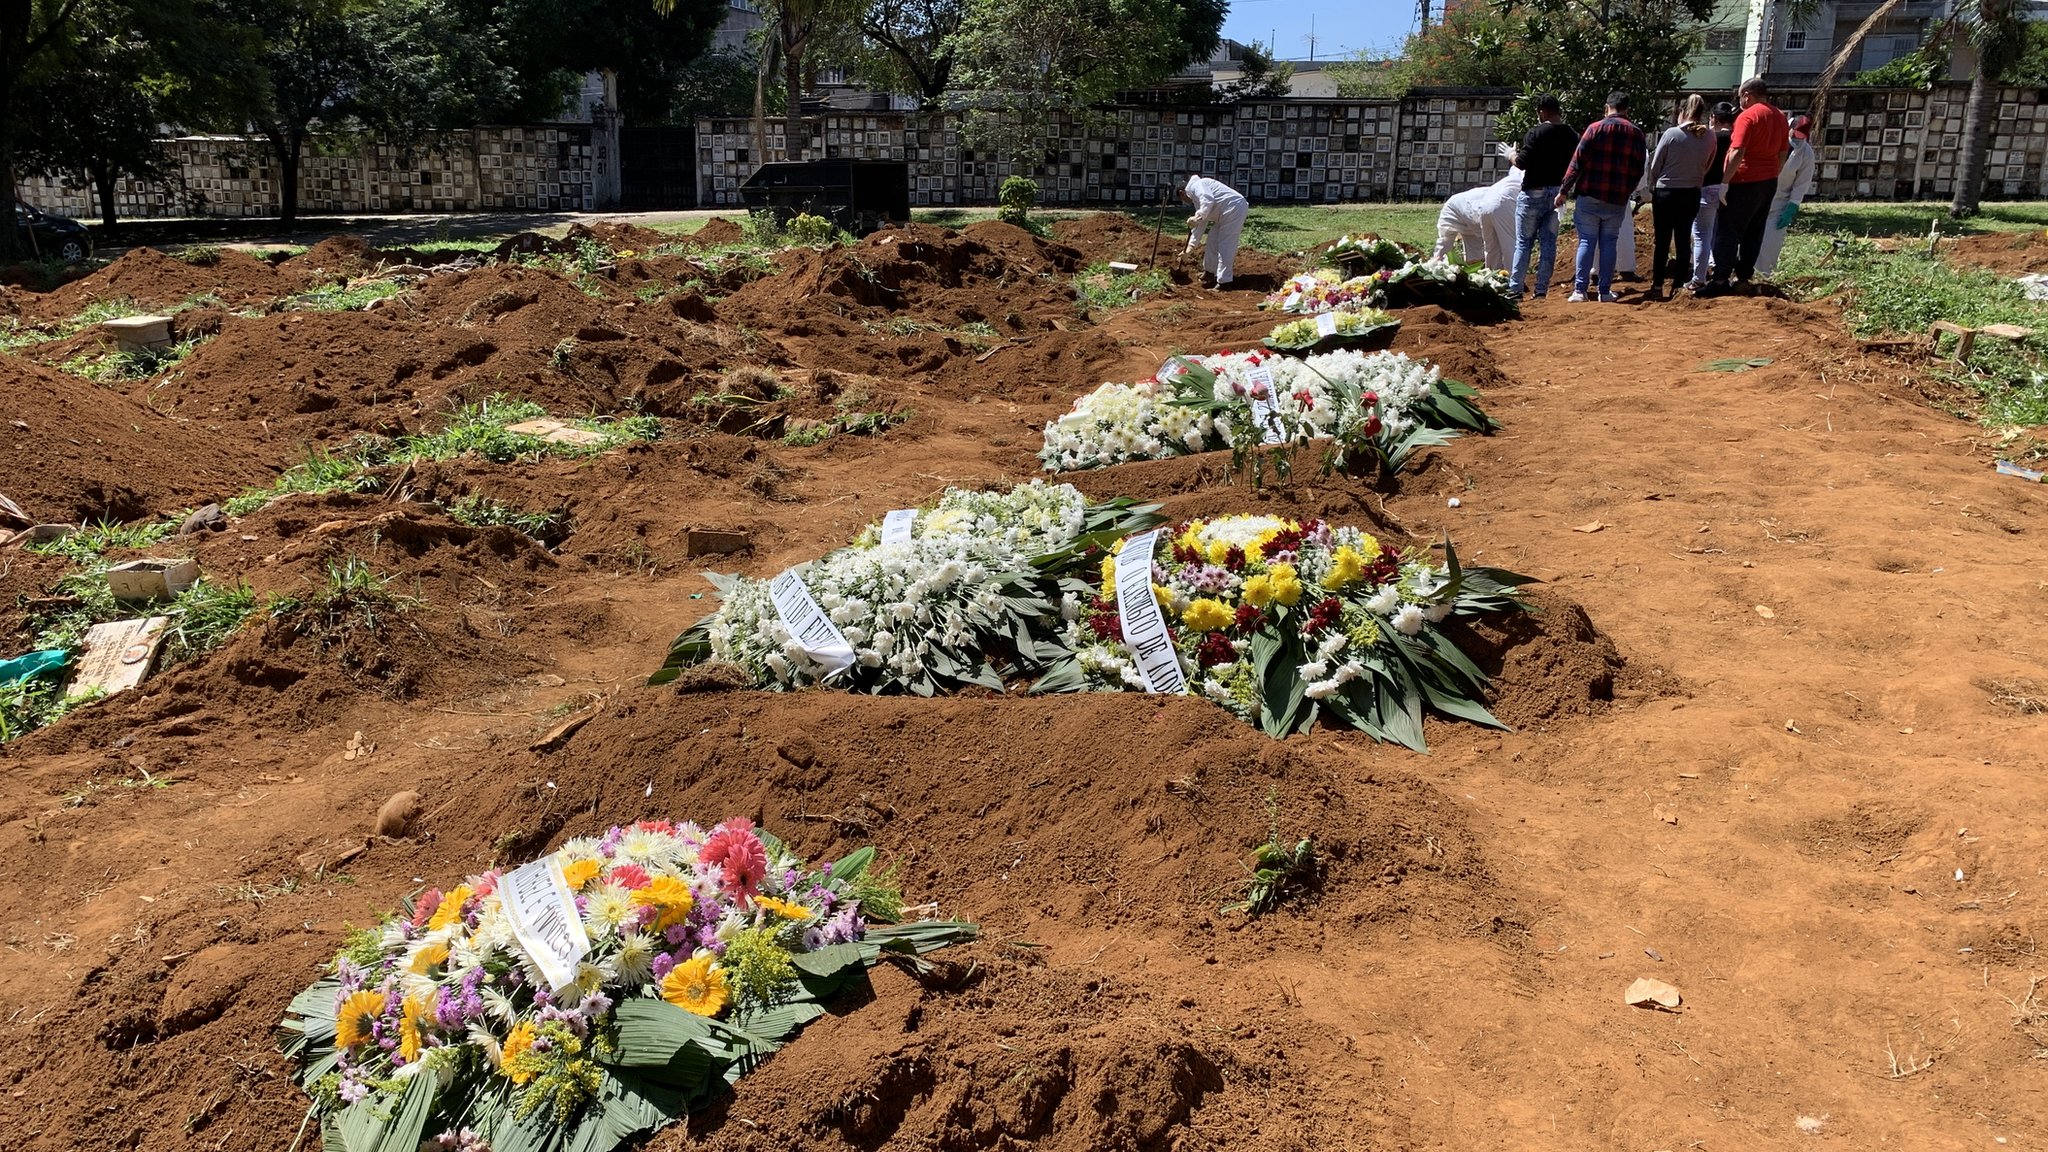 Brazil Reuse Graves to Cope with New COVID-19 Deaths